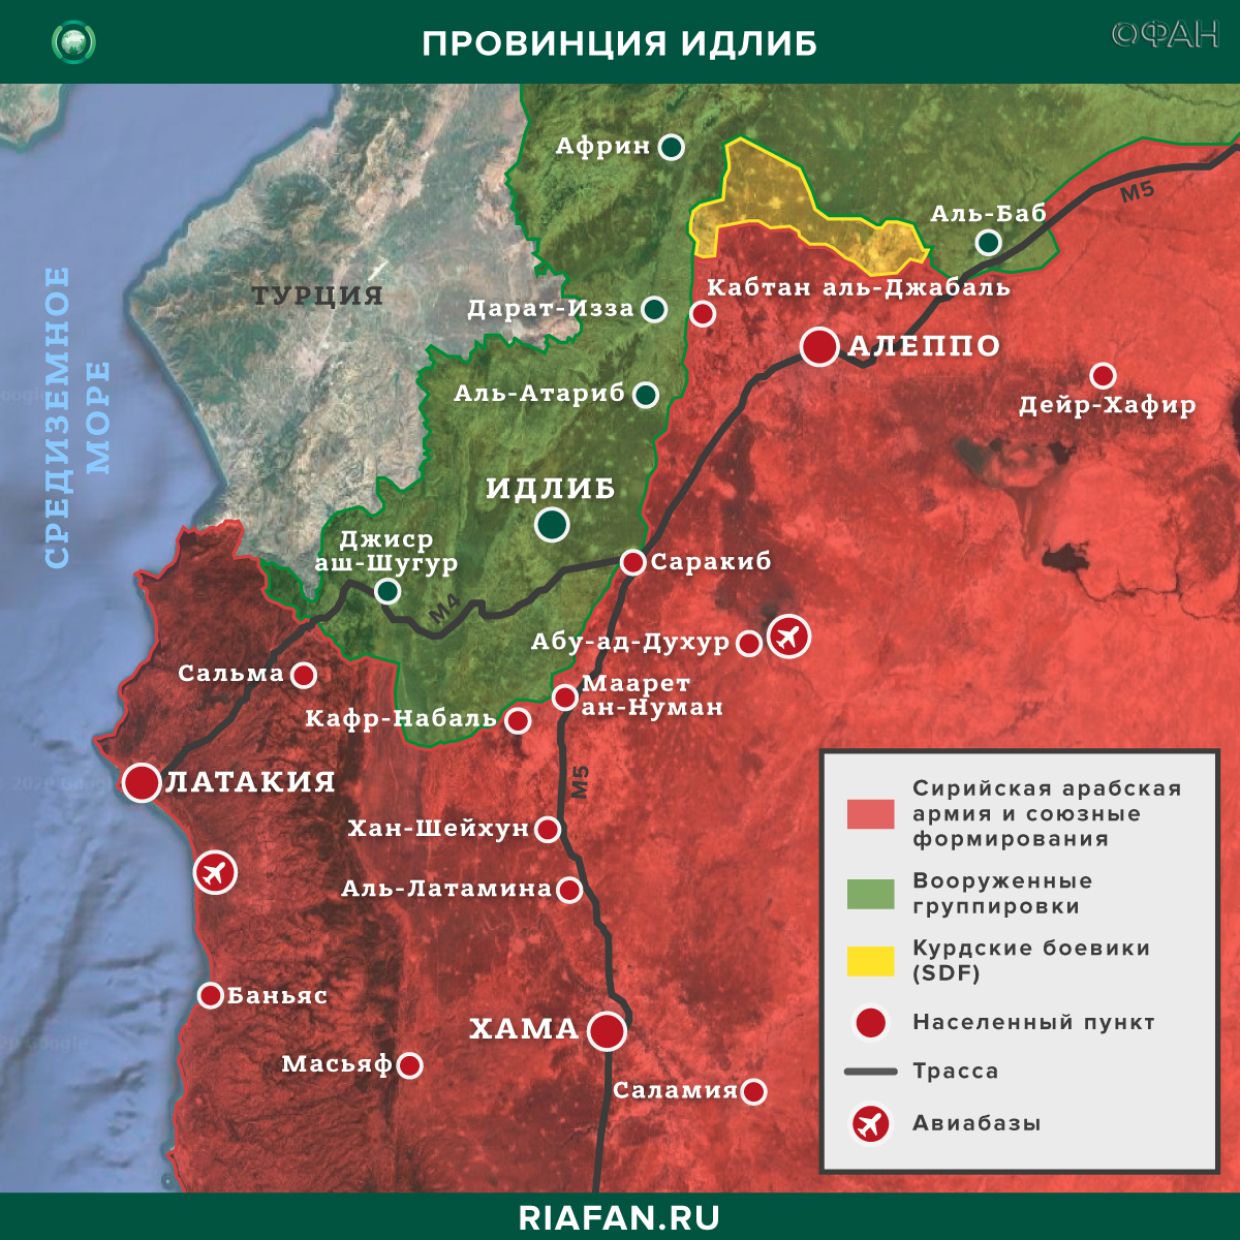 Syria the results of the day on 1 September 06.00: Turkish Armed Forces deployed a new checkpoint in Idlib